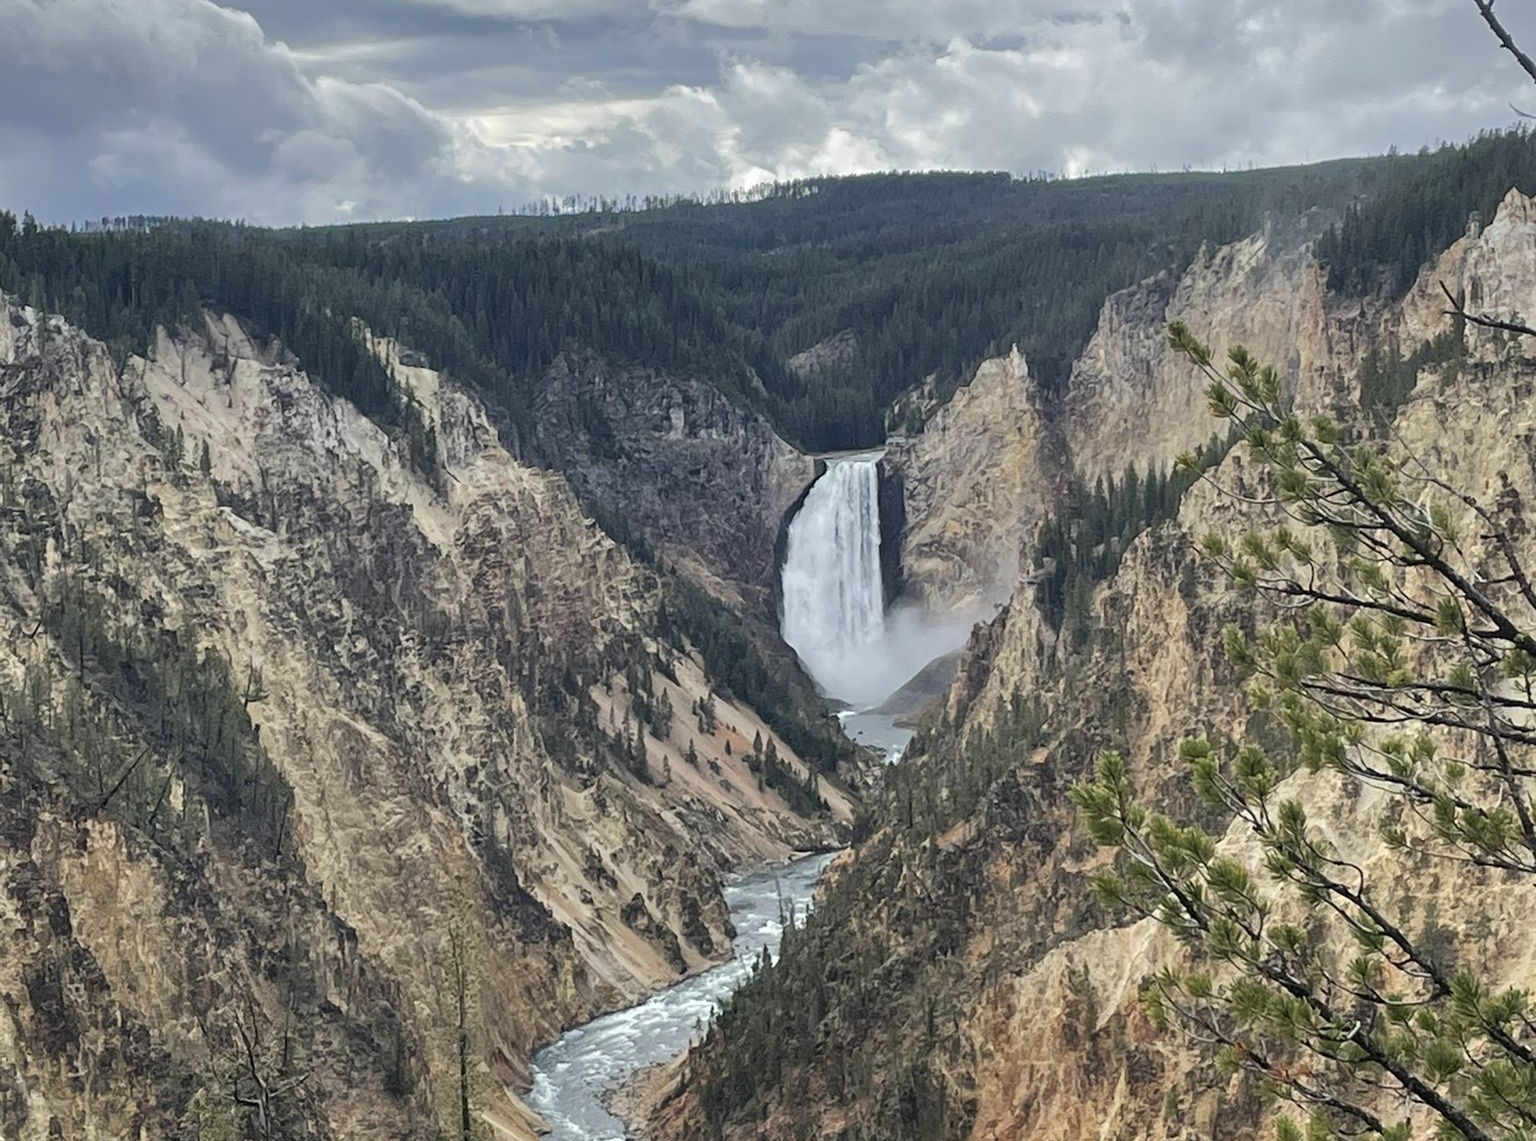 Lower Falls in the Grand Canyon of Yellowstone